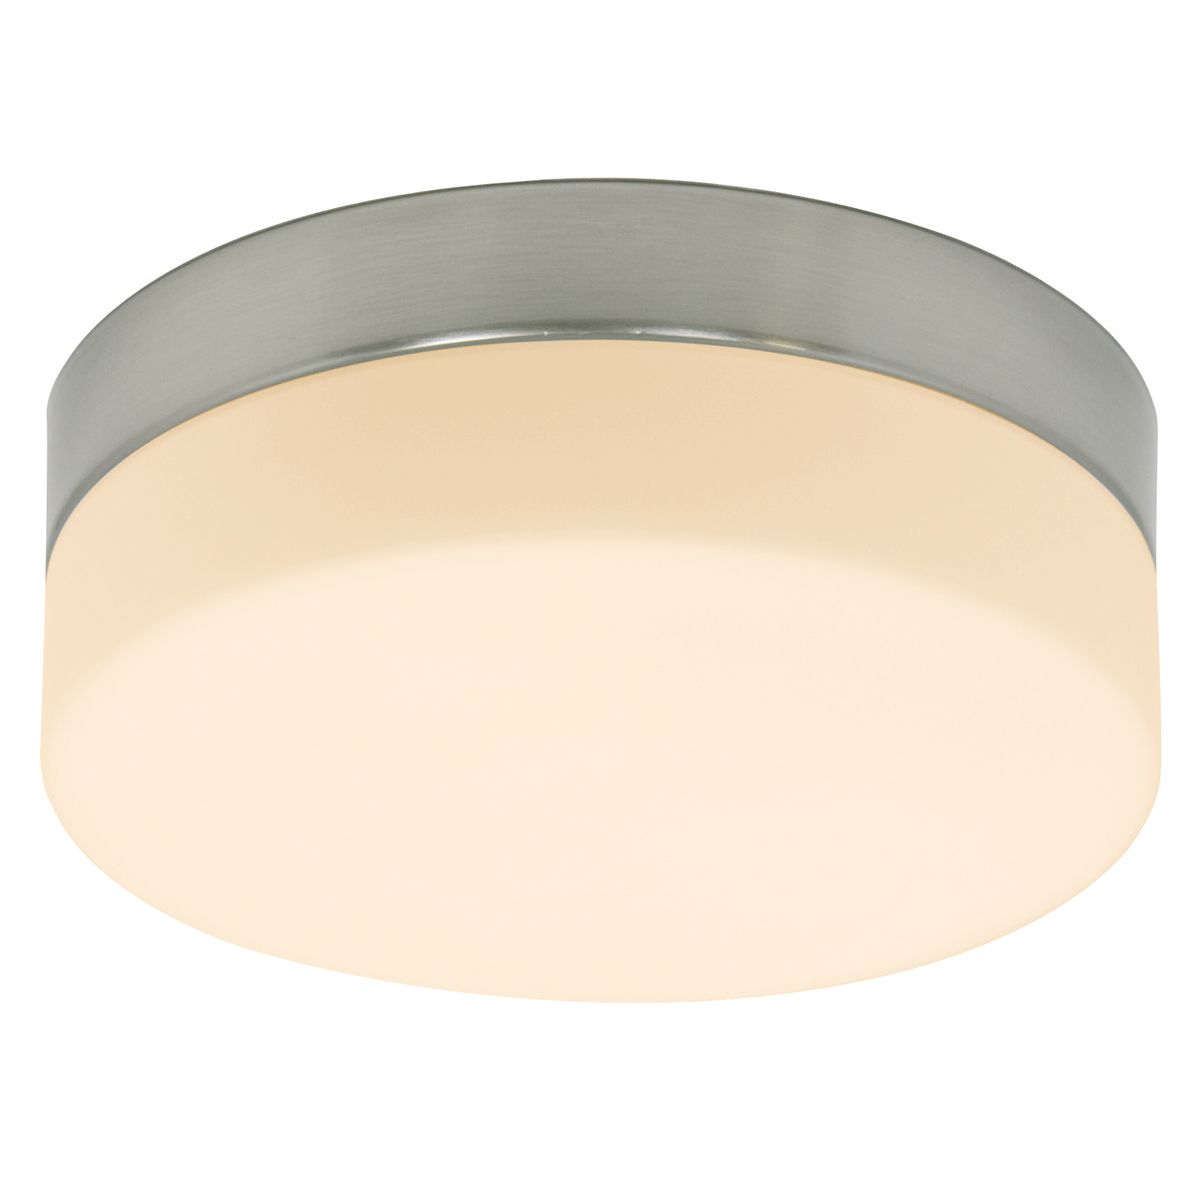 Steinhauer - Ceiling and wall - plafondlamp 30 cm - staal